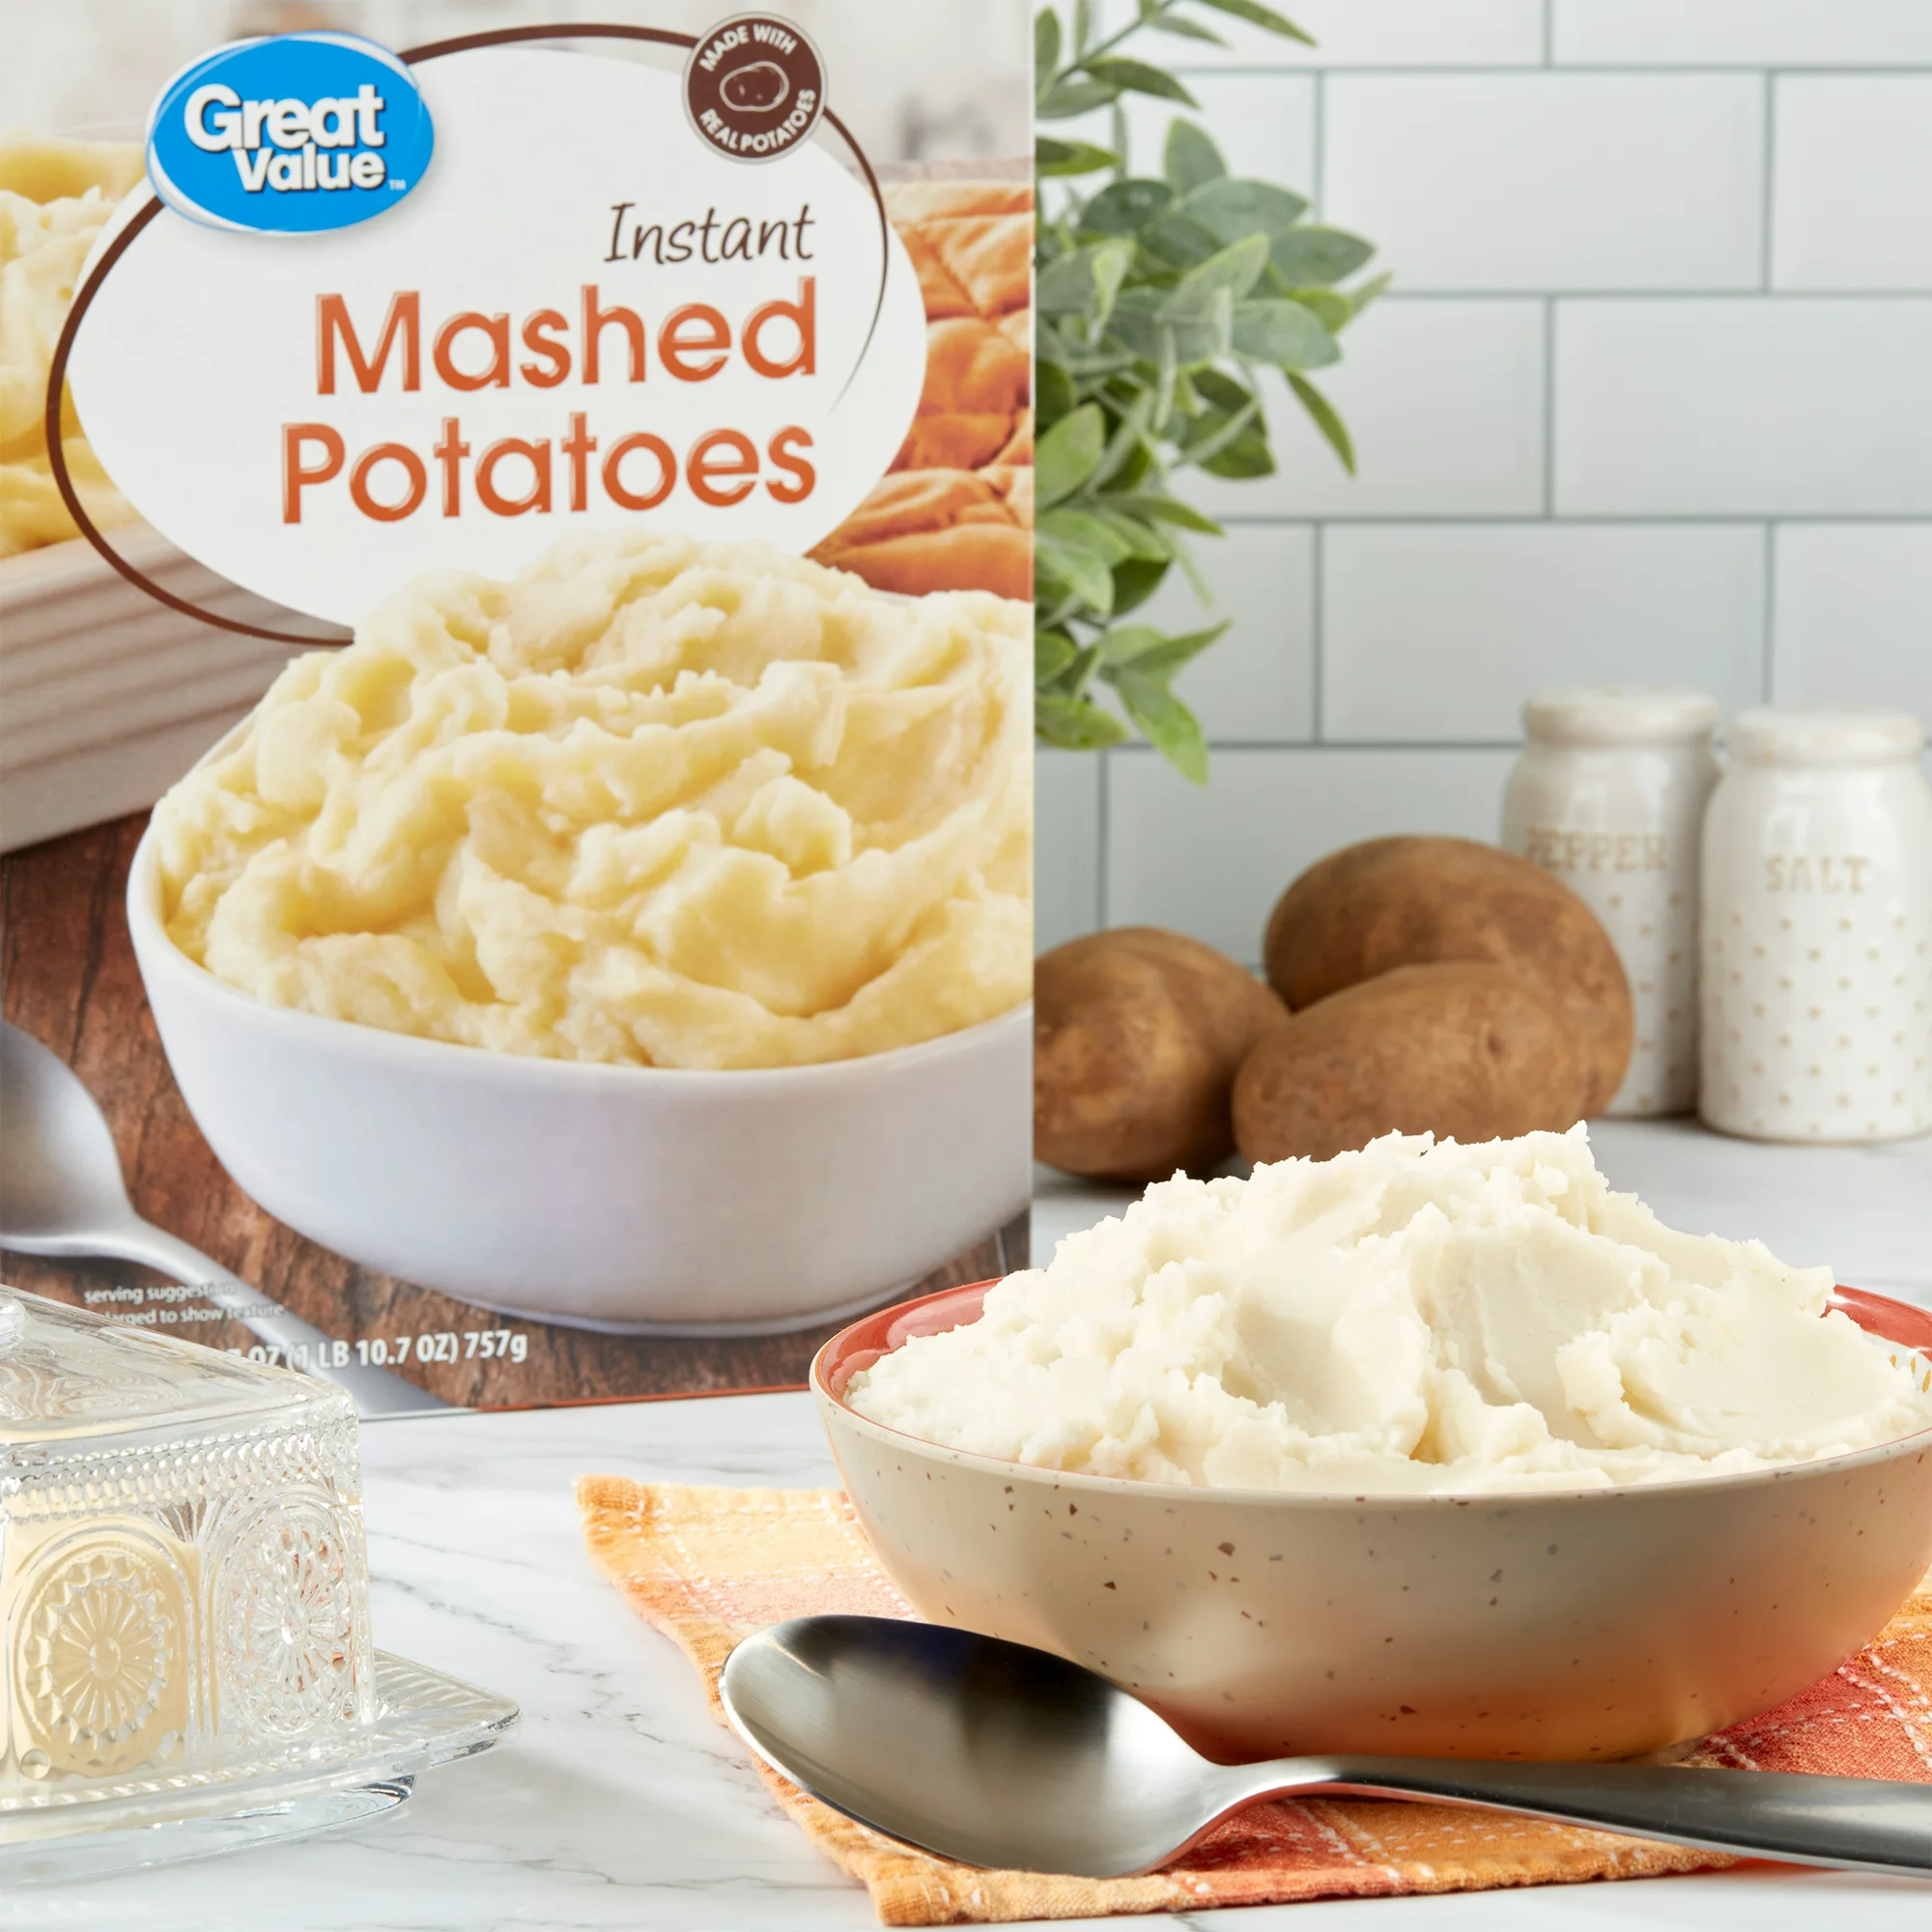 Great Value Instant Mashed Potatoes, 26.7 Oz – 1